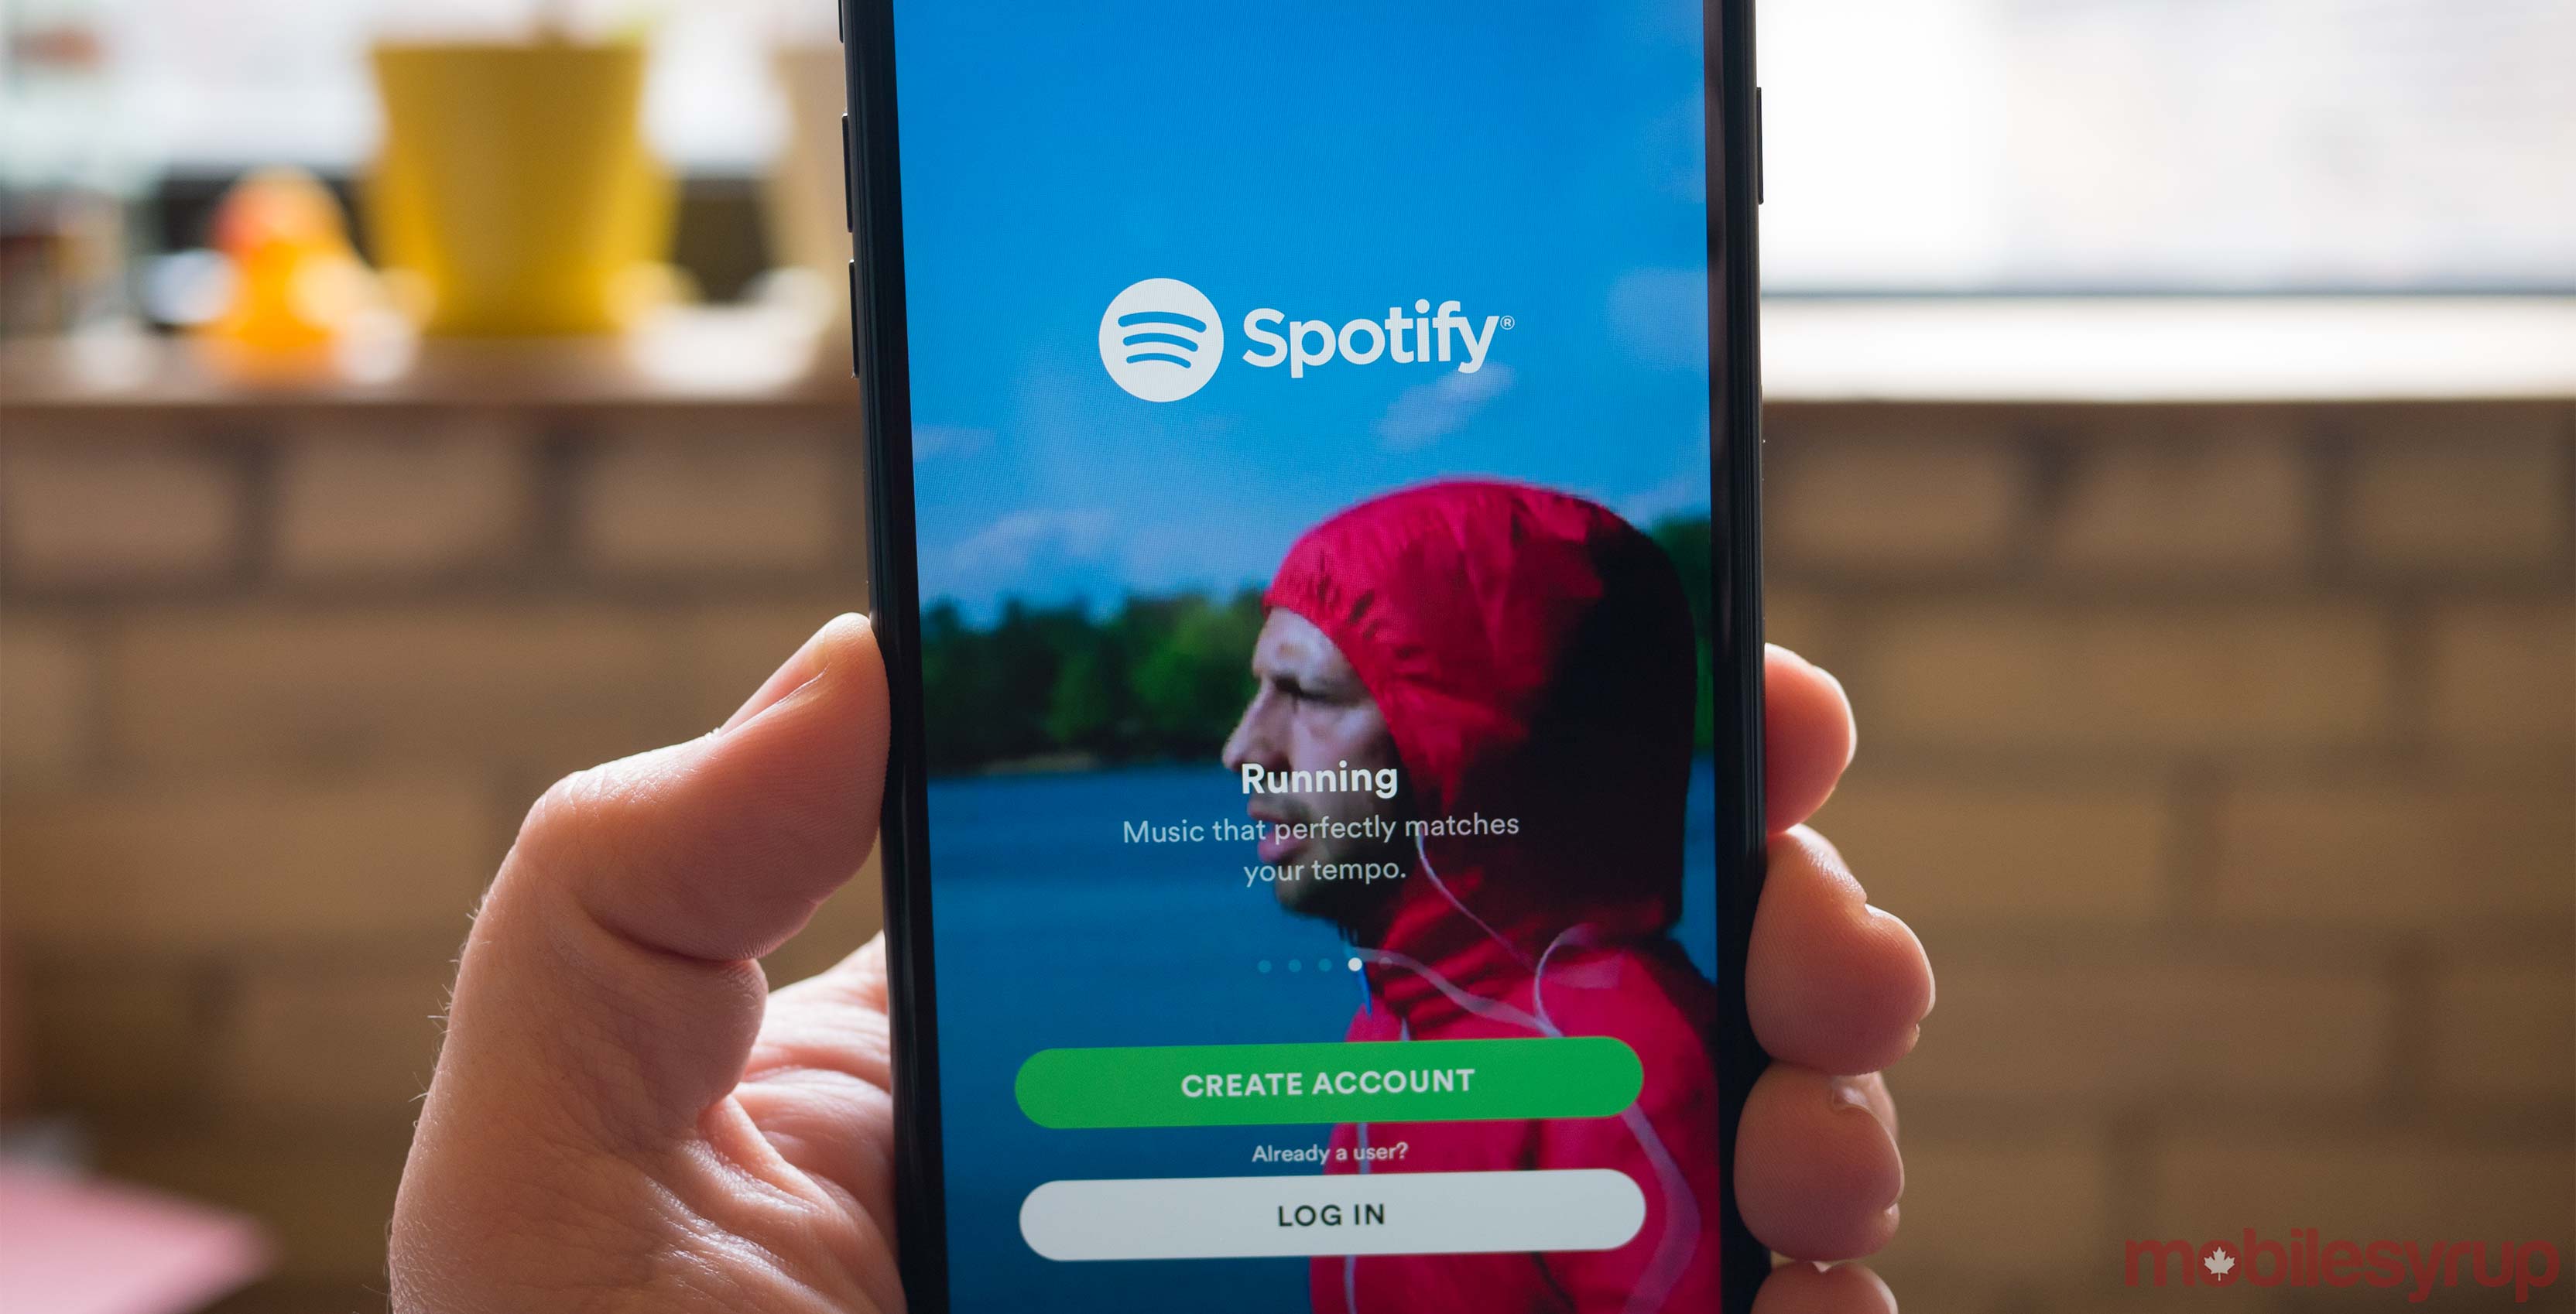 Stop ads on spotify free music